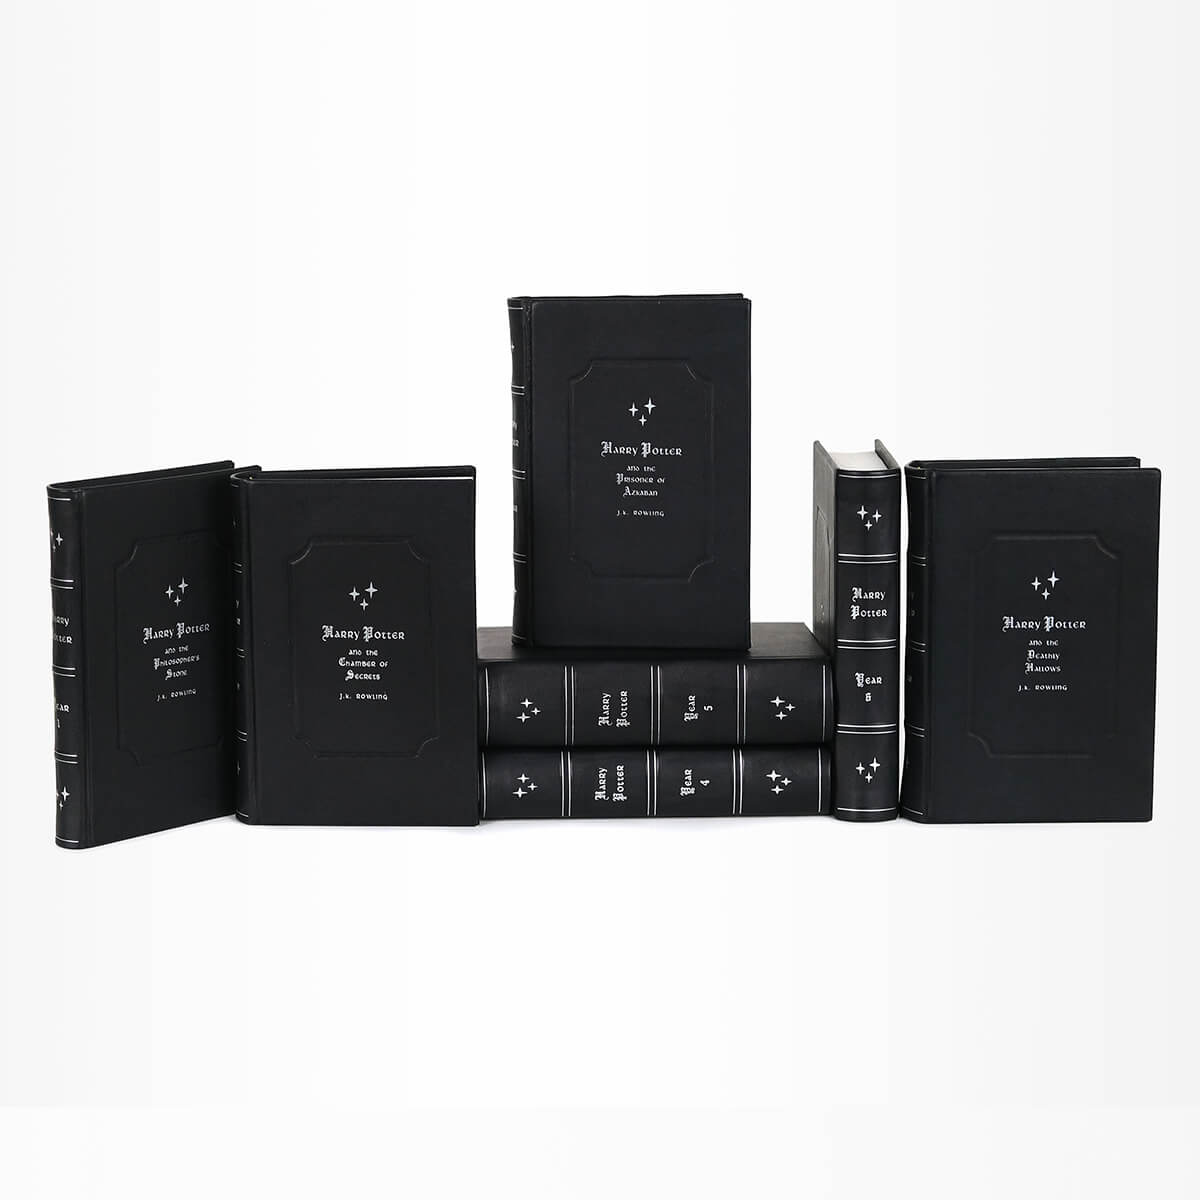 Genuine black leather Harry Potter from Juniper Books with silver book titles, silver ornaments, and silver stars on spines. Front cover features book titles and author name in silver gothic font.